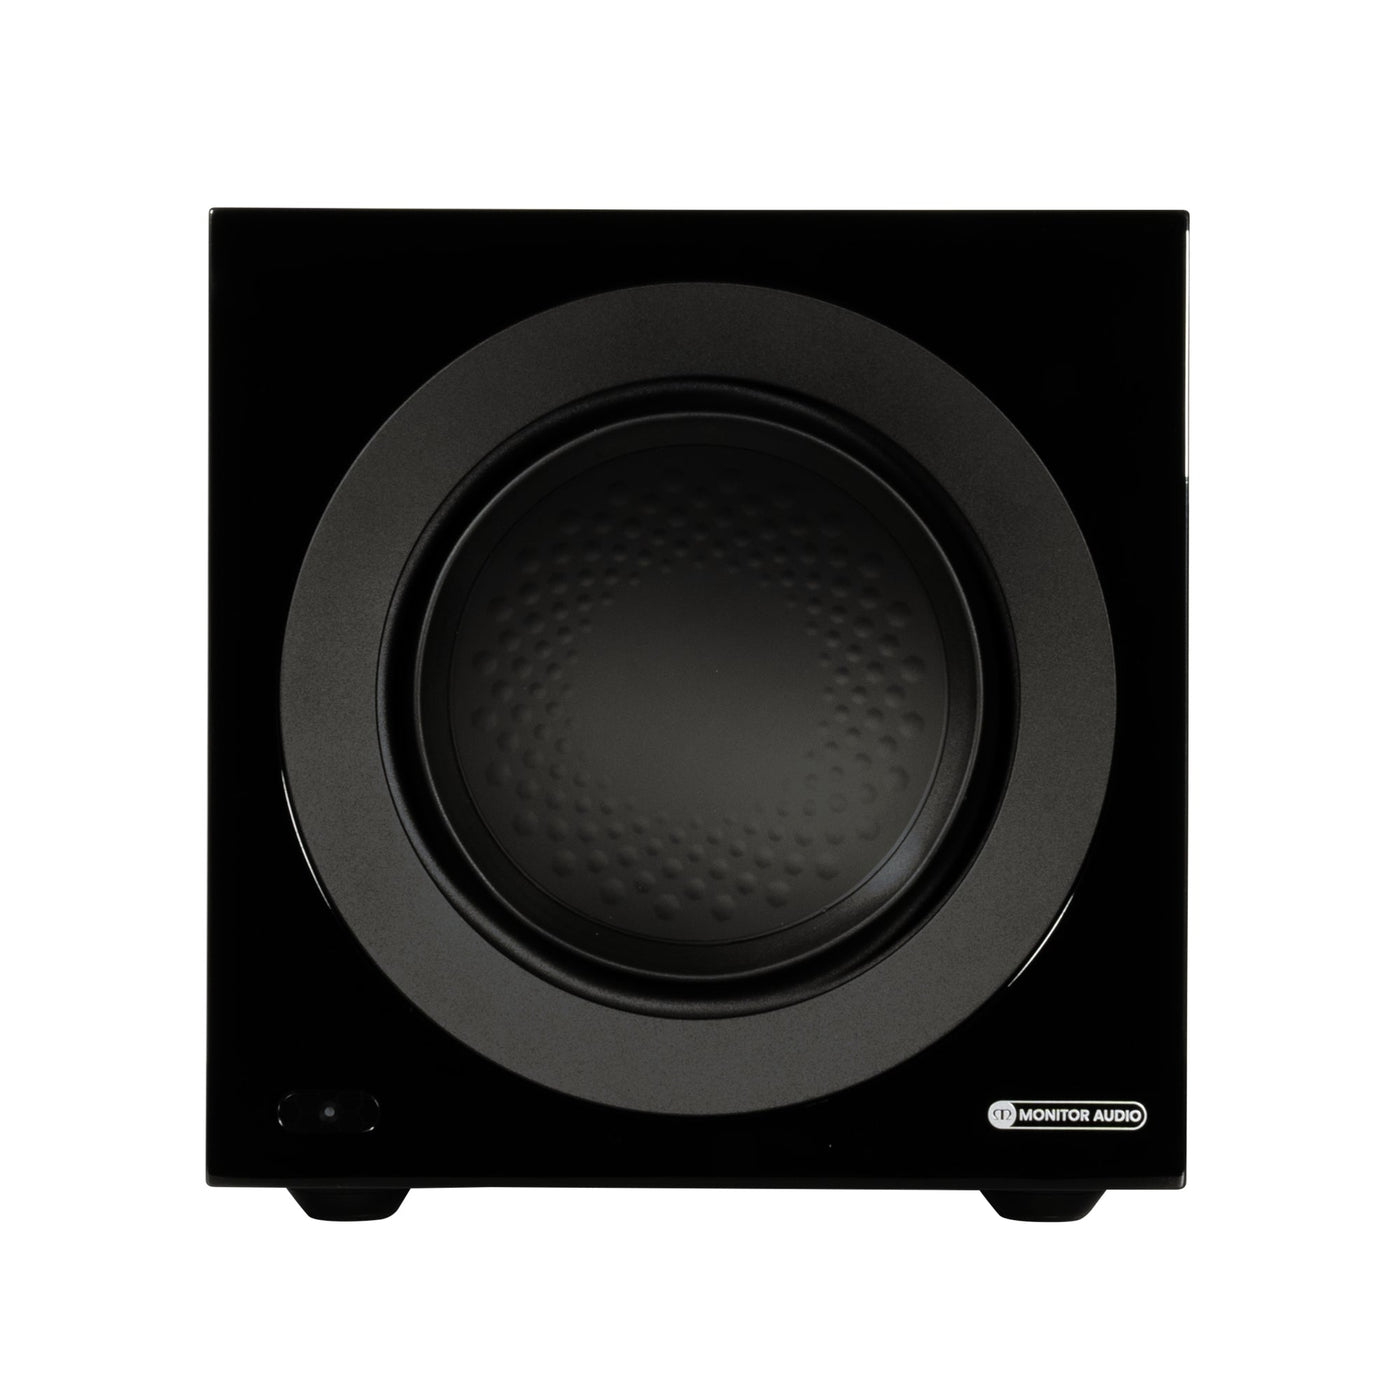 Monitor Audio Monitor Audio Anthra W10 Subwoofer Subwoofers